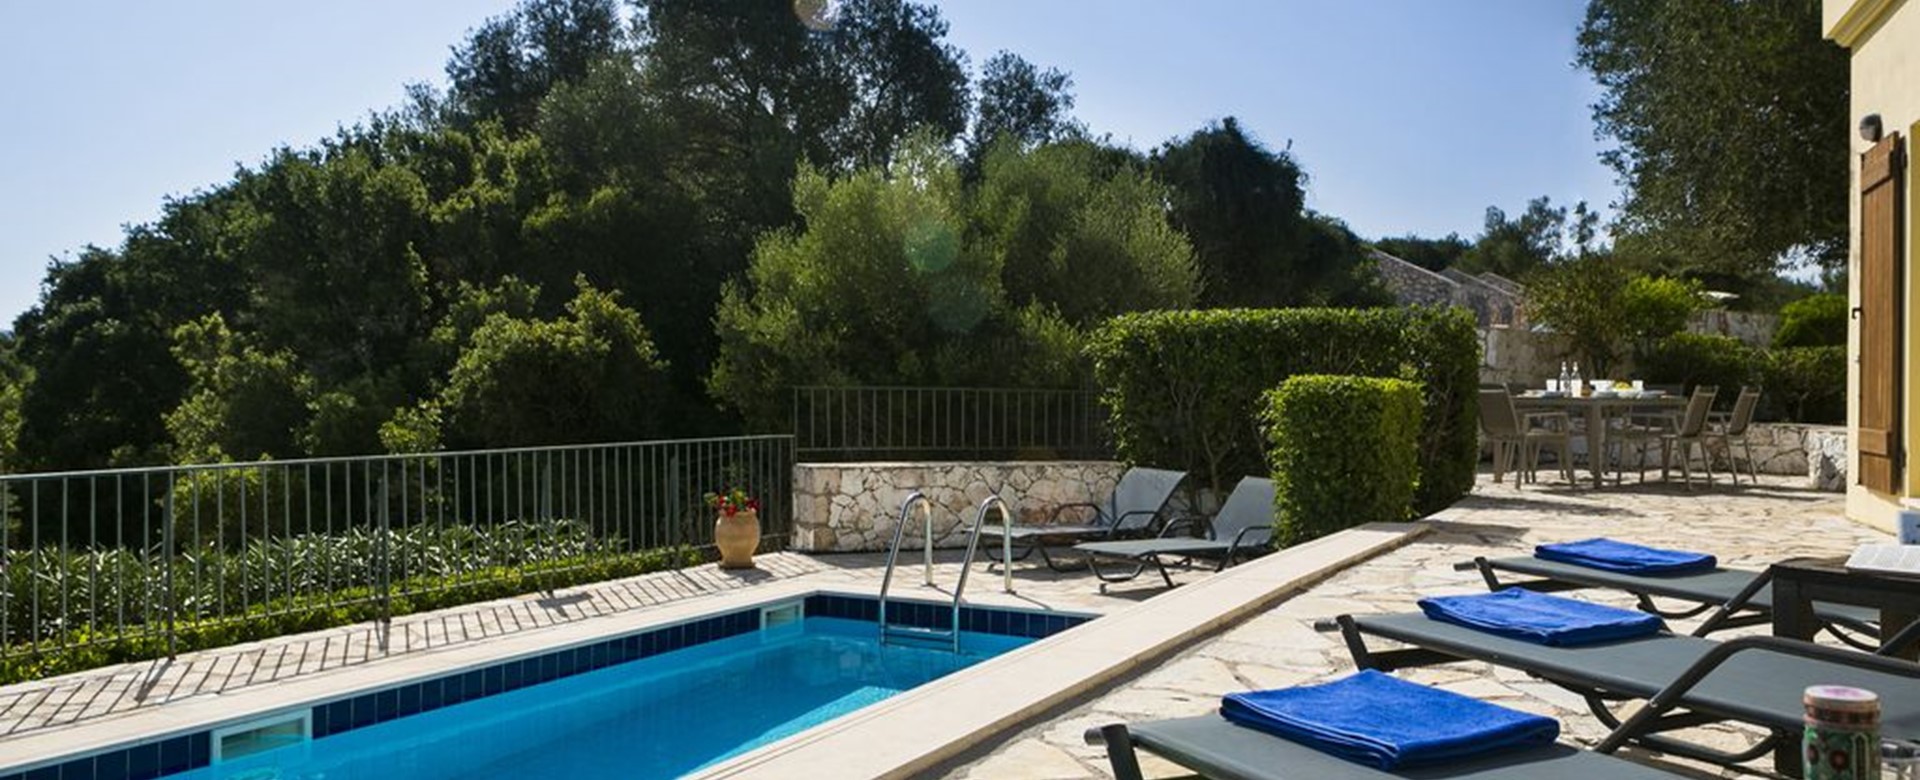 Sun beds and pool sorrounded by lush green trees in Villa Cypress, Fiscardo, Kefalonia, Greek Islands